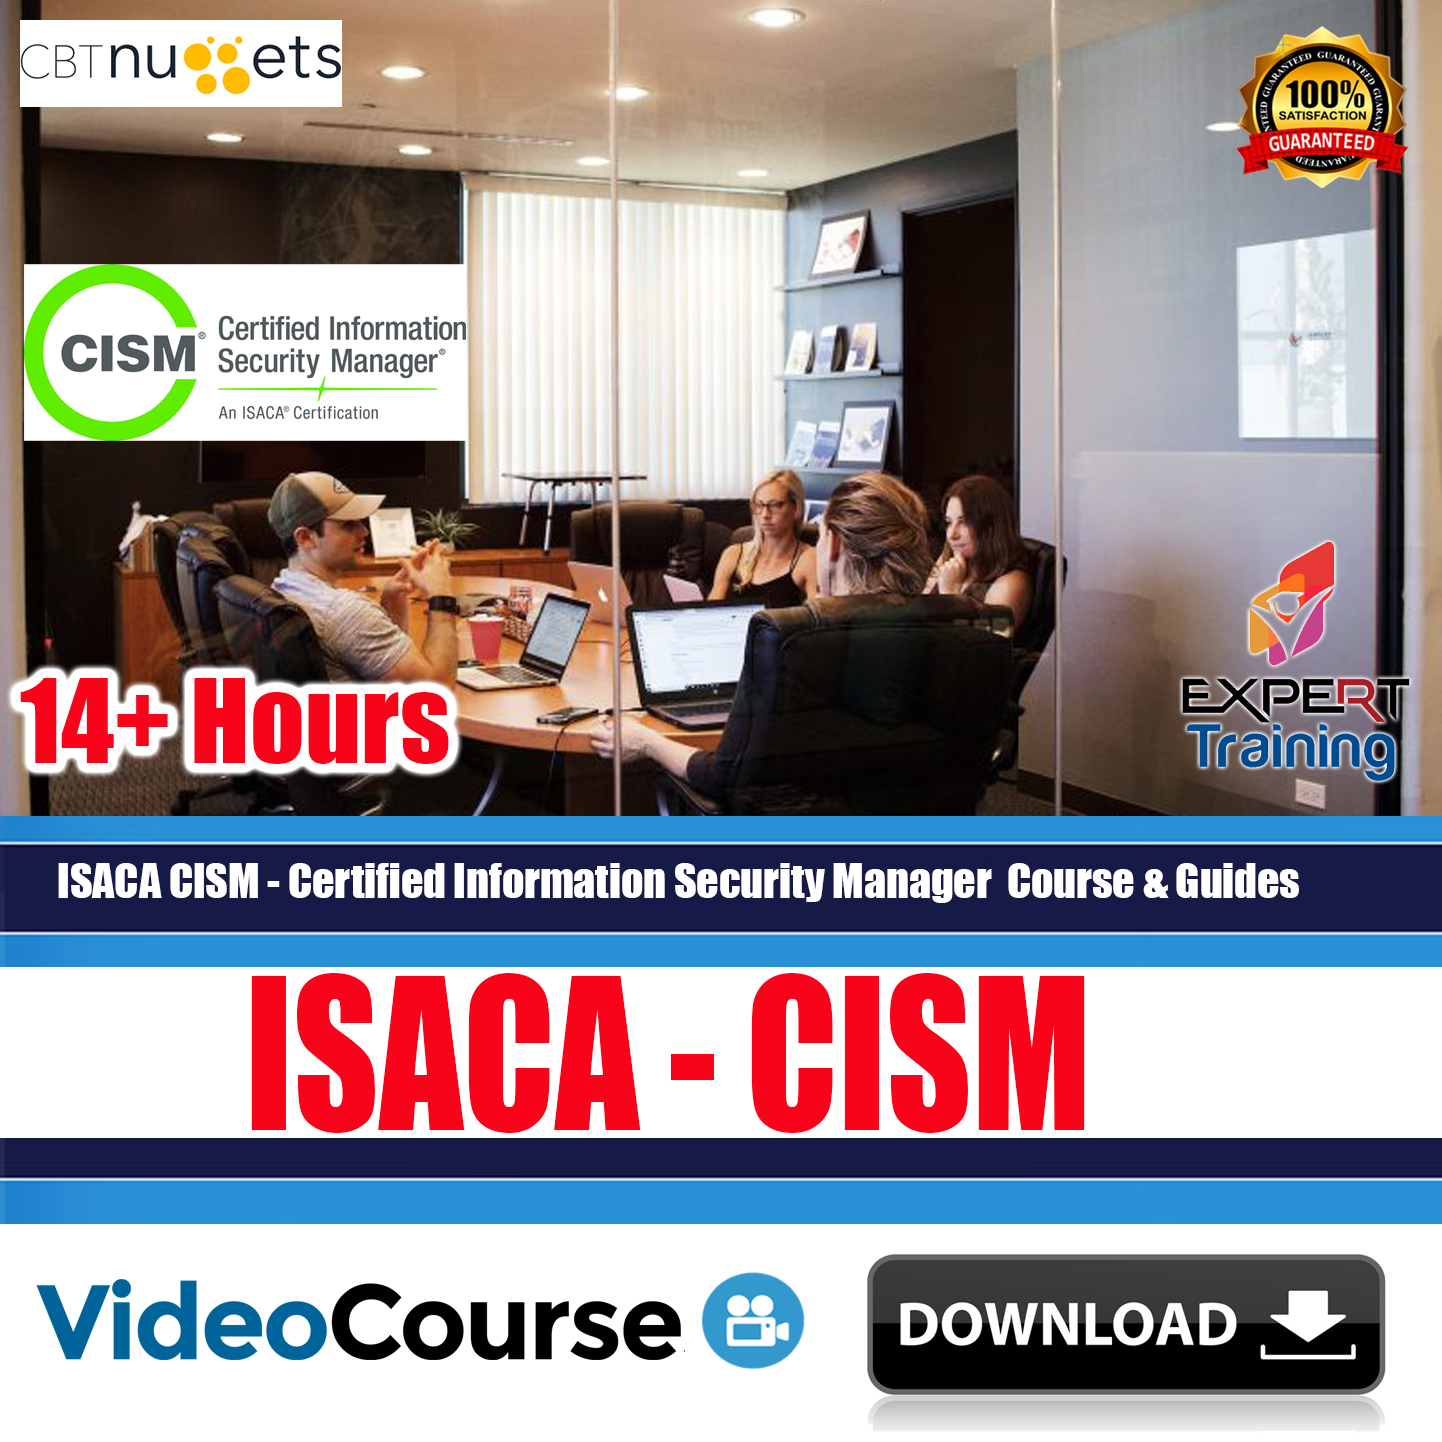 ISACA CISM – Certified Information Security Manager Course & Guides